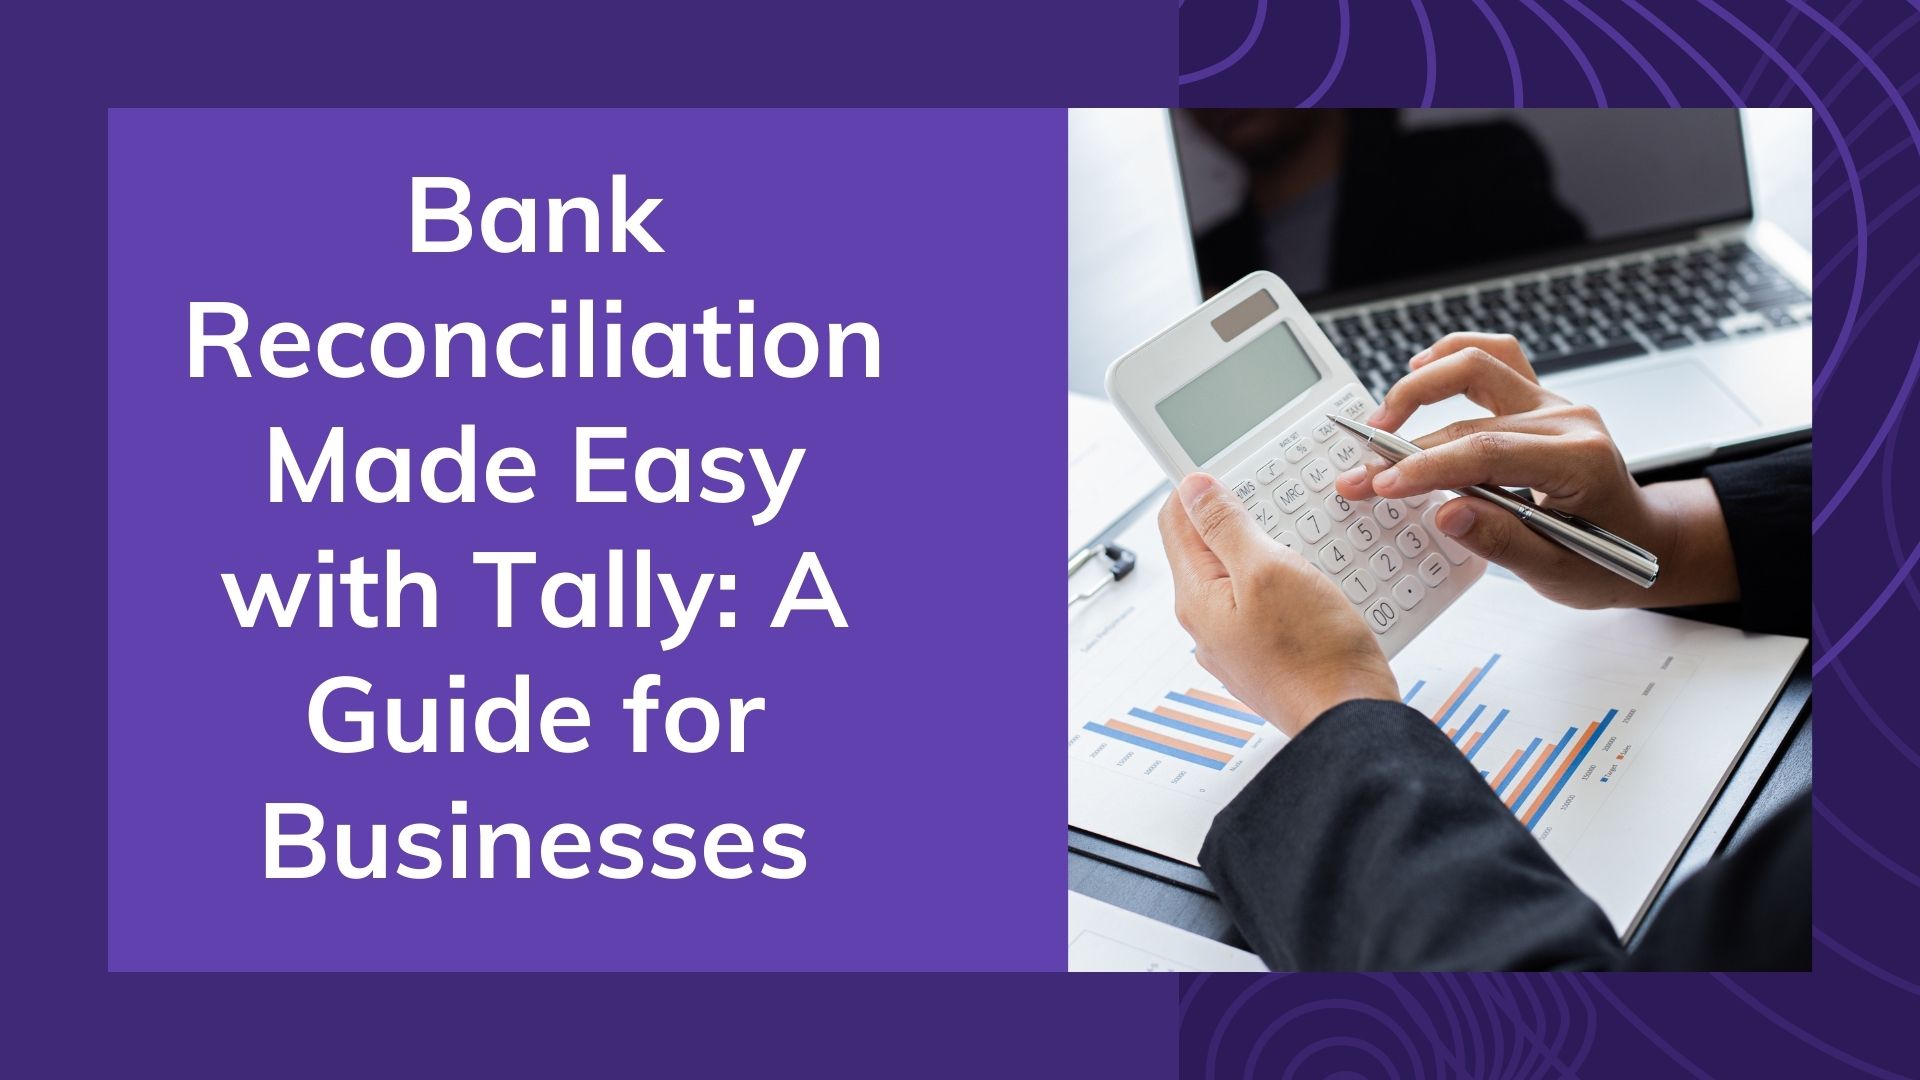 Bank Reconciliation Made Easy with Tally A Guide for Businesses